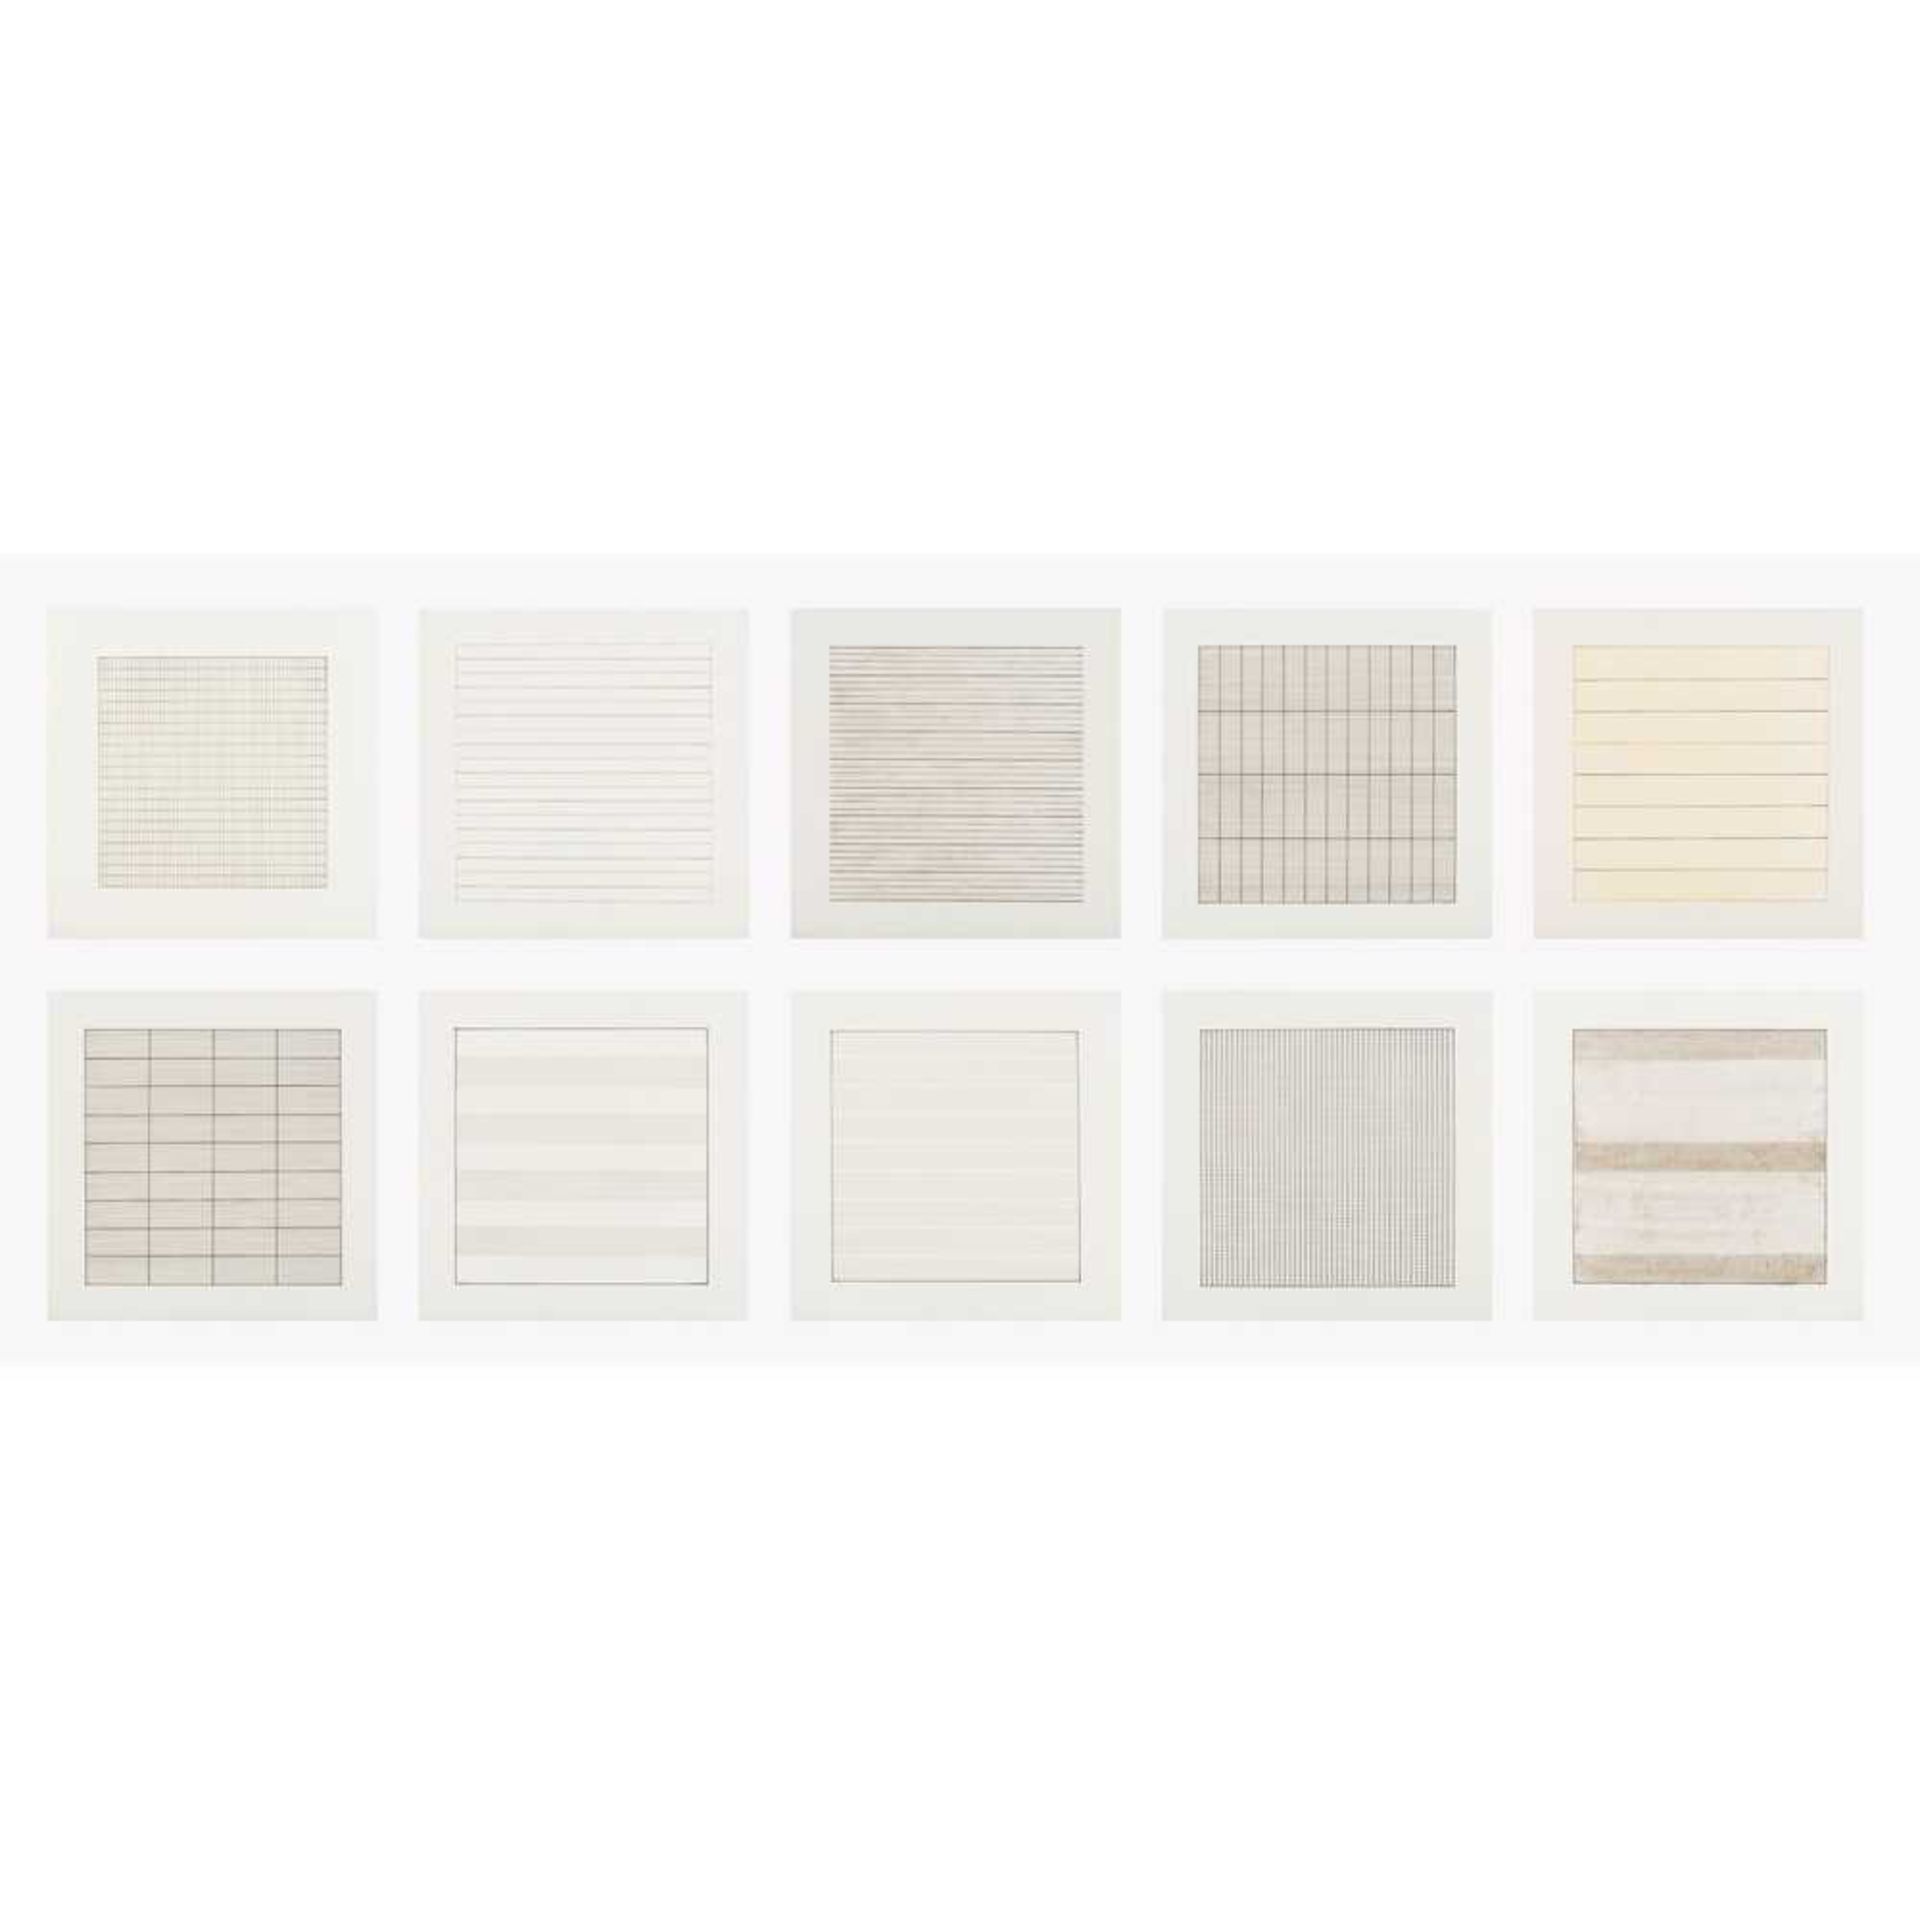 AGNES MARTIN (CANADIAN/AMERICAN 1912-2004) PAINTINGS & DRAWINGS 1974-1990 (SUITE OF 10) - Image 2 of 2